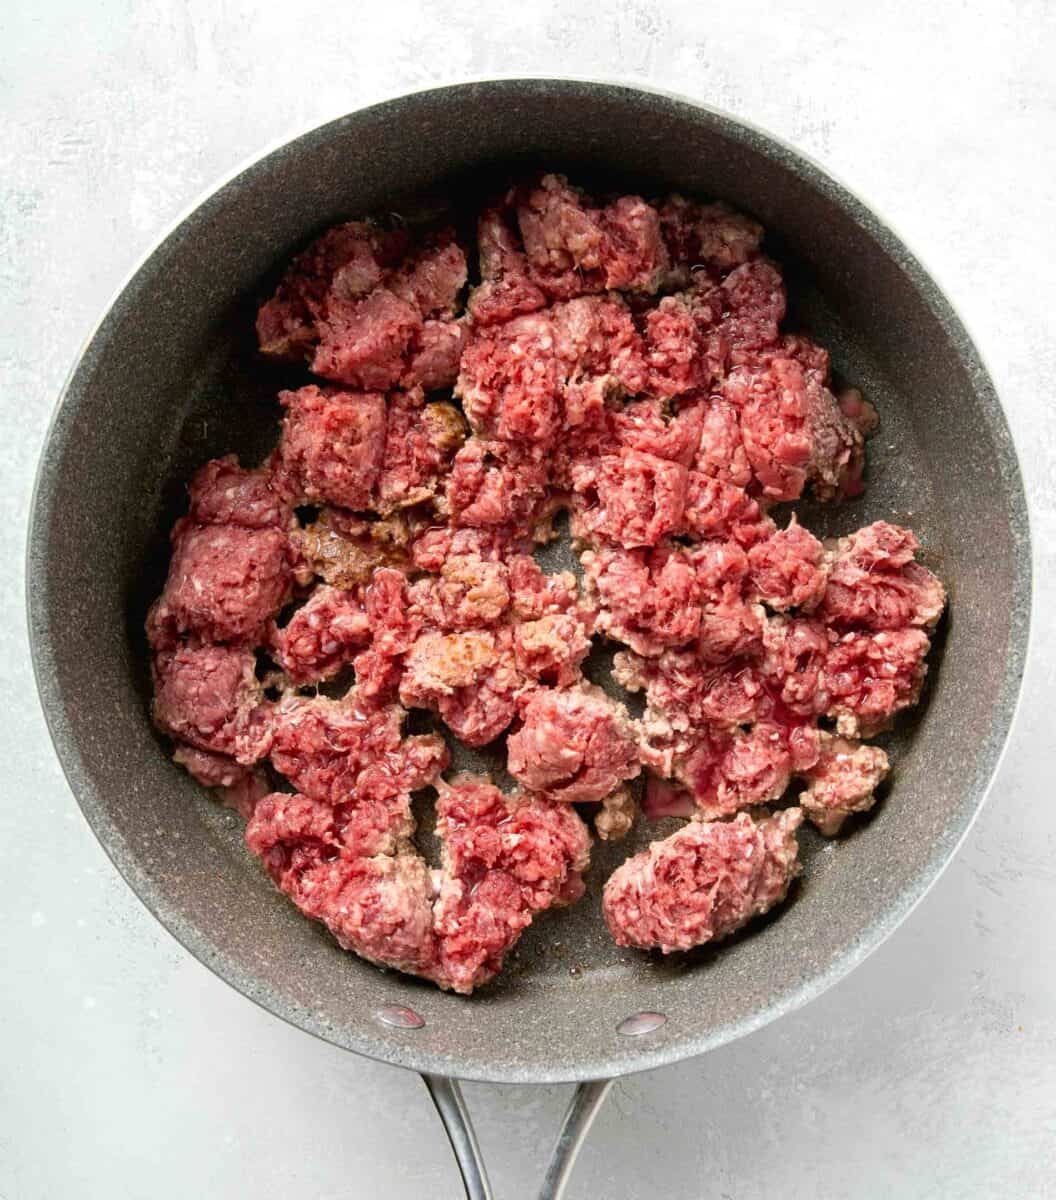 ground beef being cooked in a nonstick skillet